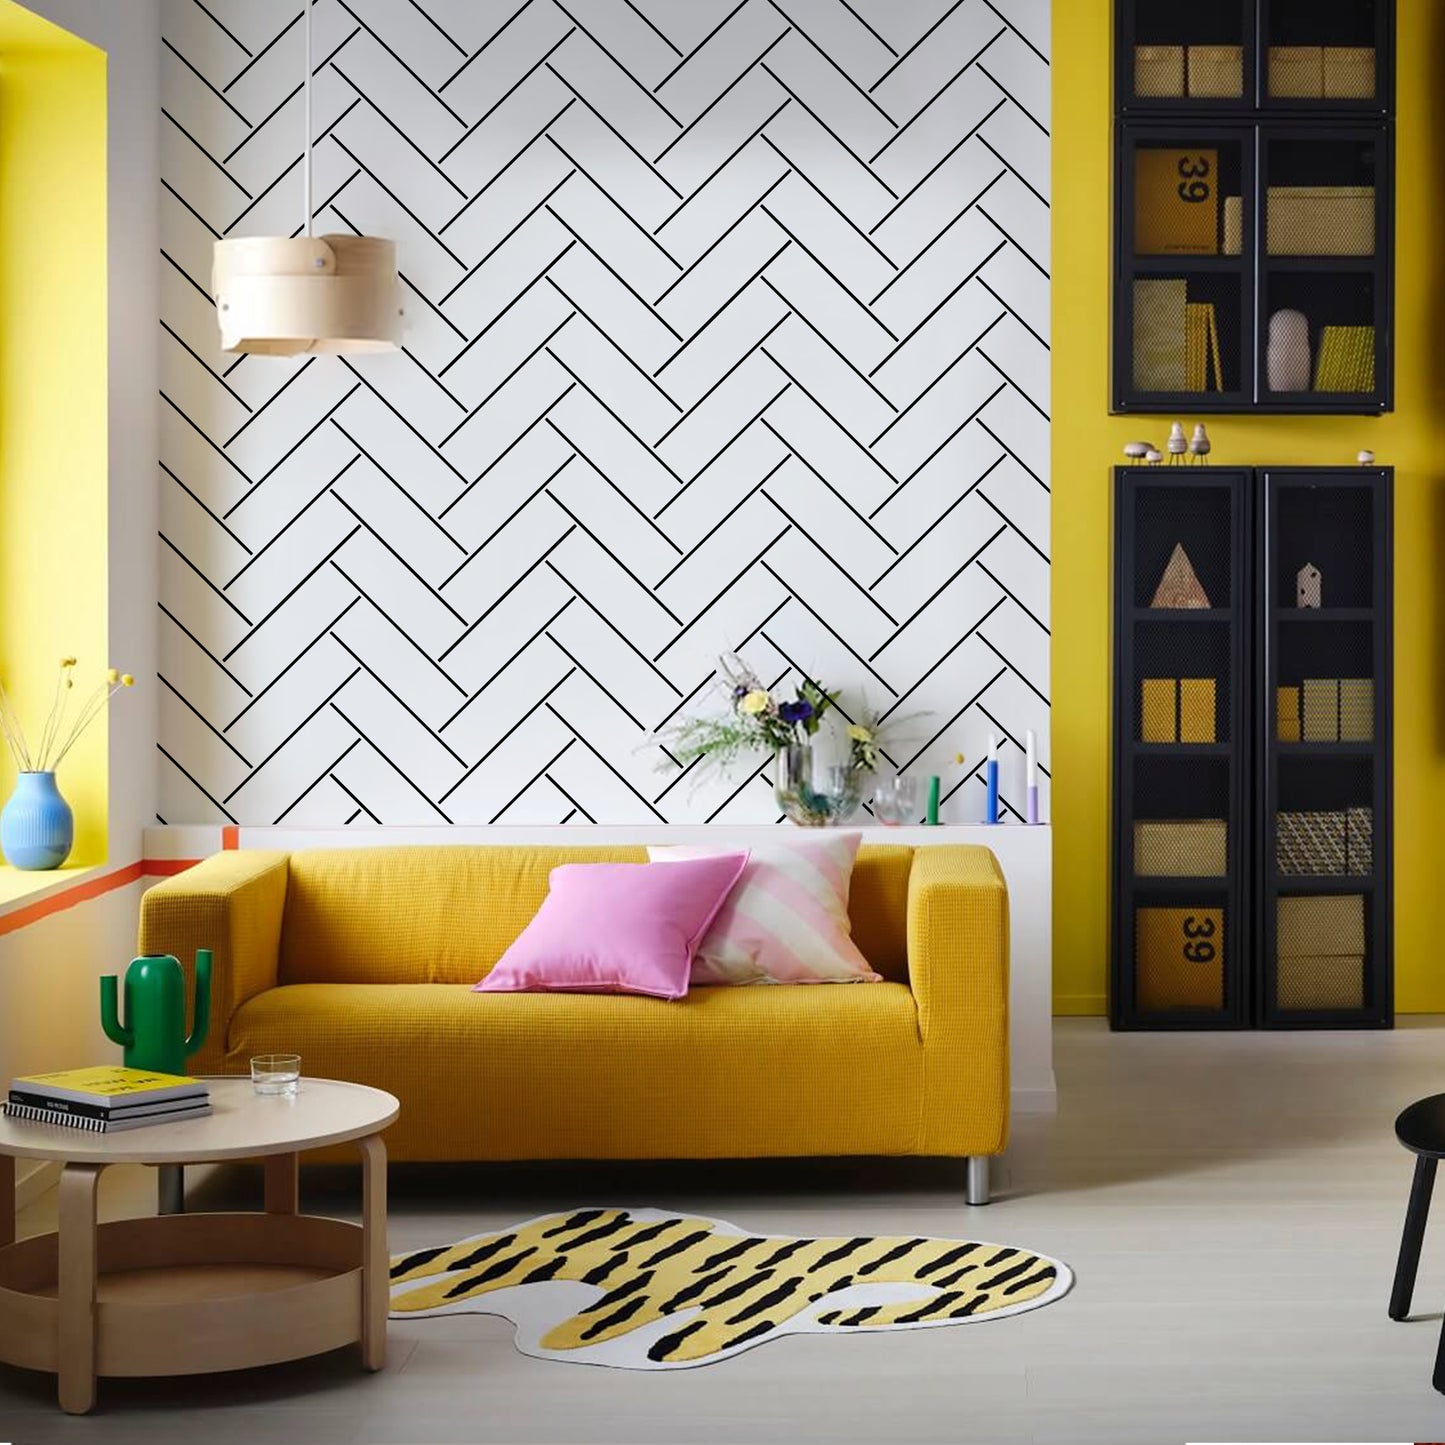 Kayra Decor Herringbone Design Stencil for Wall Painting (KDMD1426)